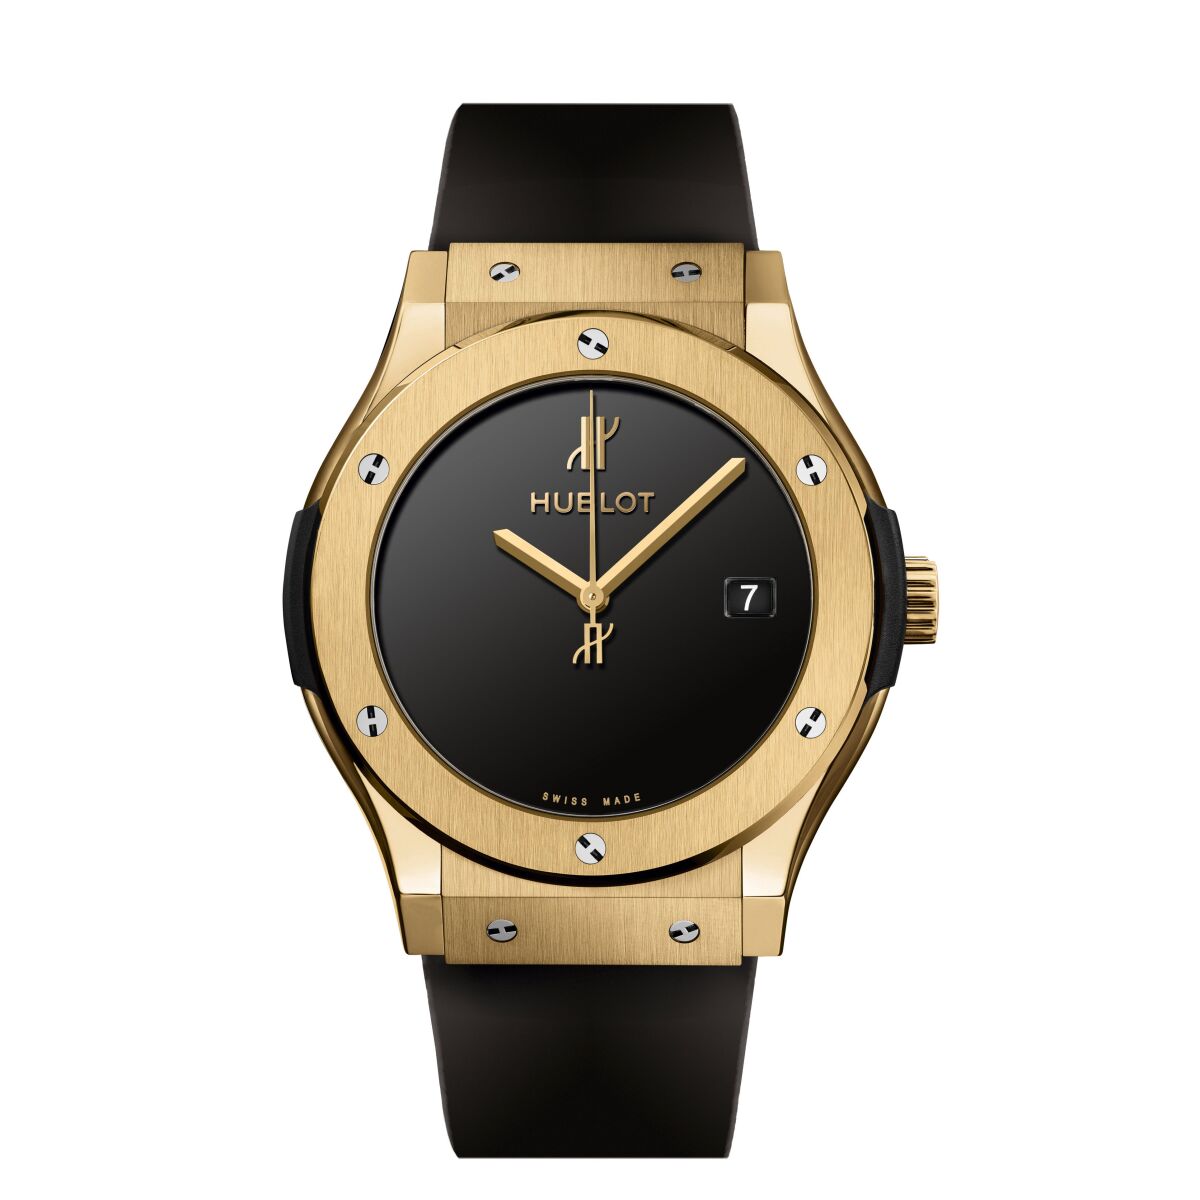 A photo of Hublot's Classic Fusion 40 Years Anniversary watch in yellow gold.